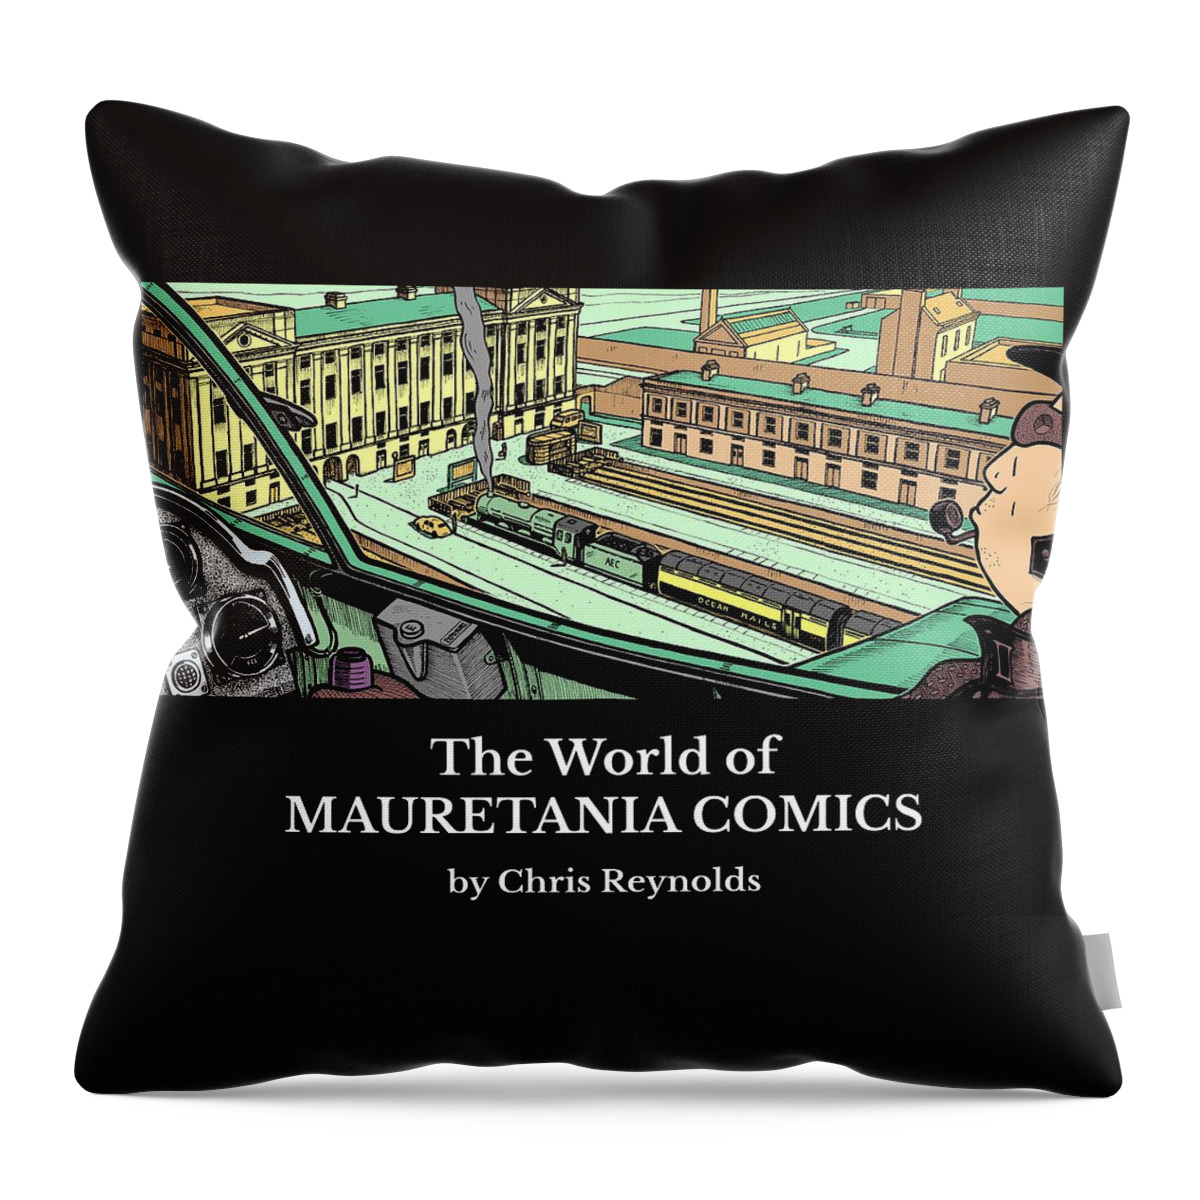 Station Throw Pillow featuring the digital art The World of Mauretania Comics by Chris Reynolds by Chris Reynolds